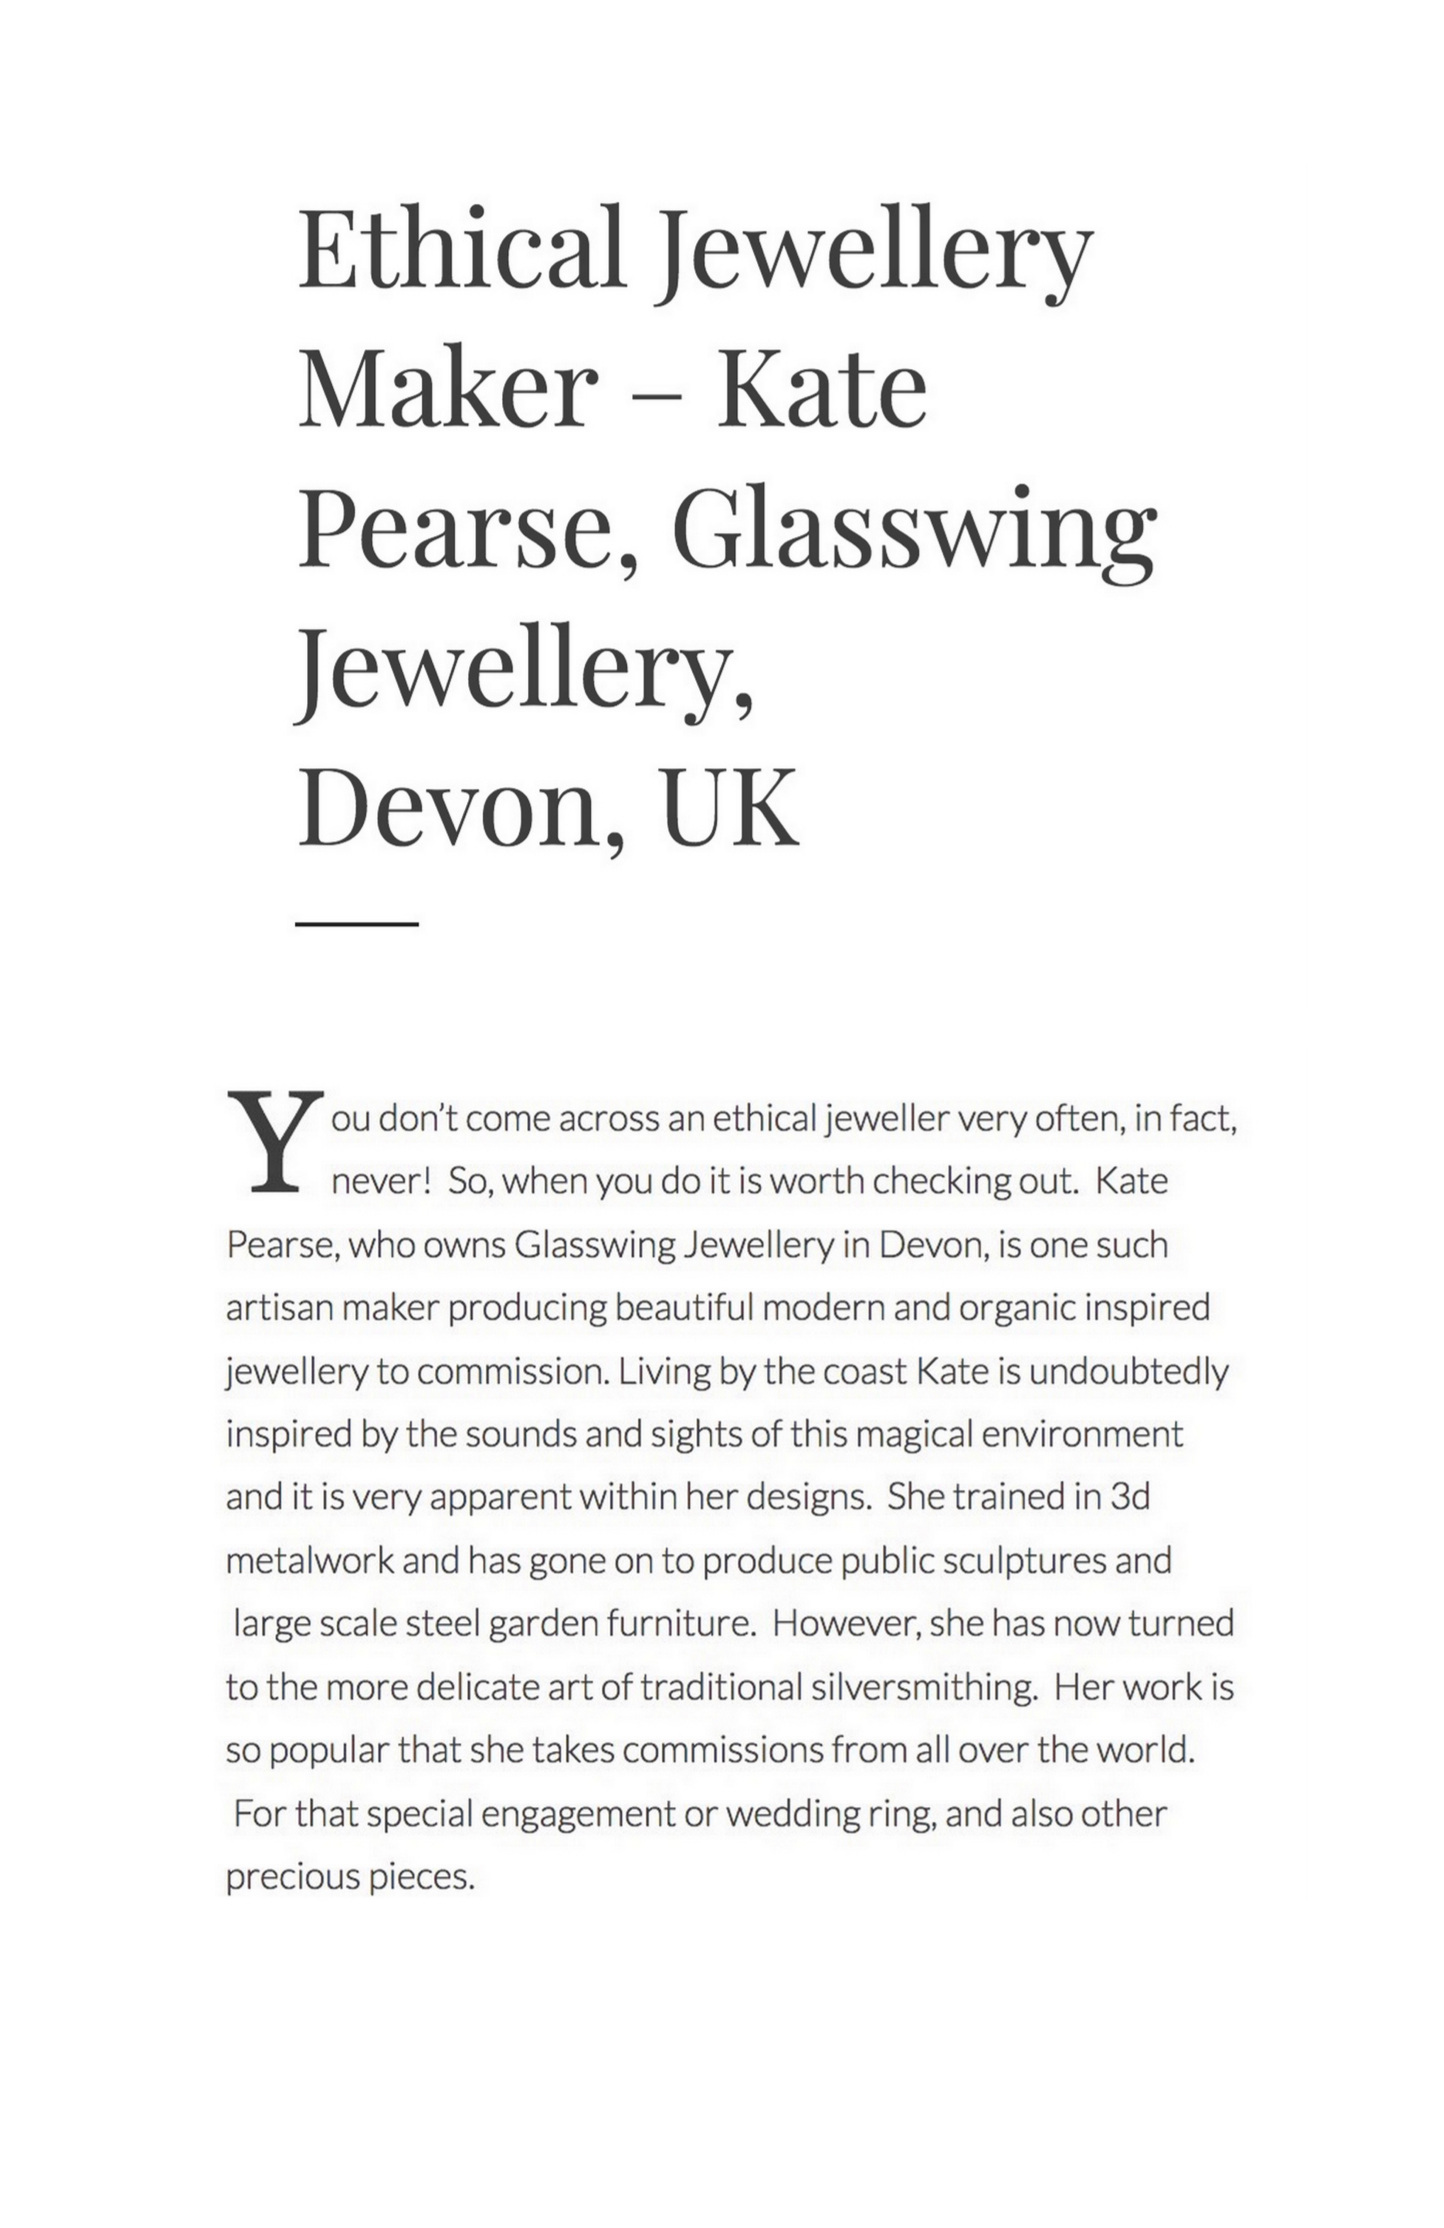 ethical-jewellery-article-the-h-files-glasswing.jpg